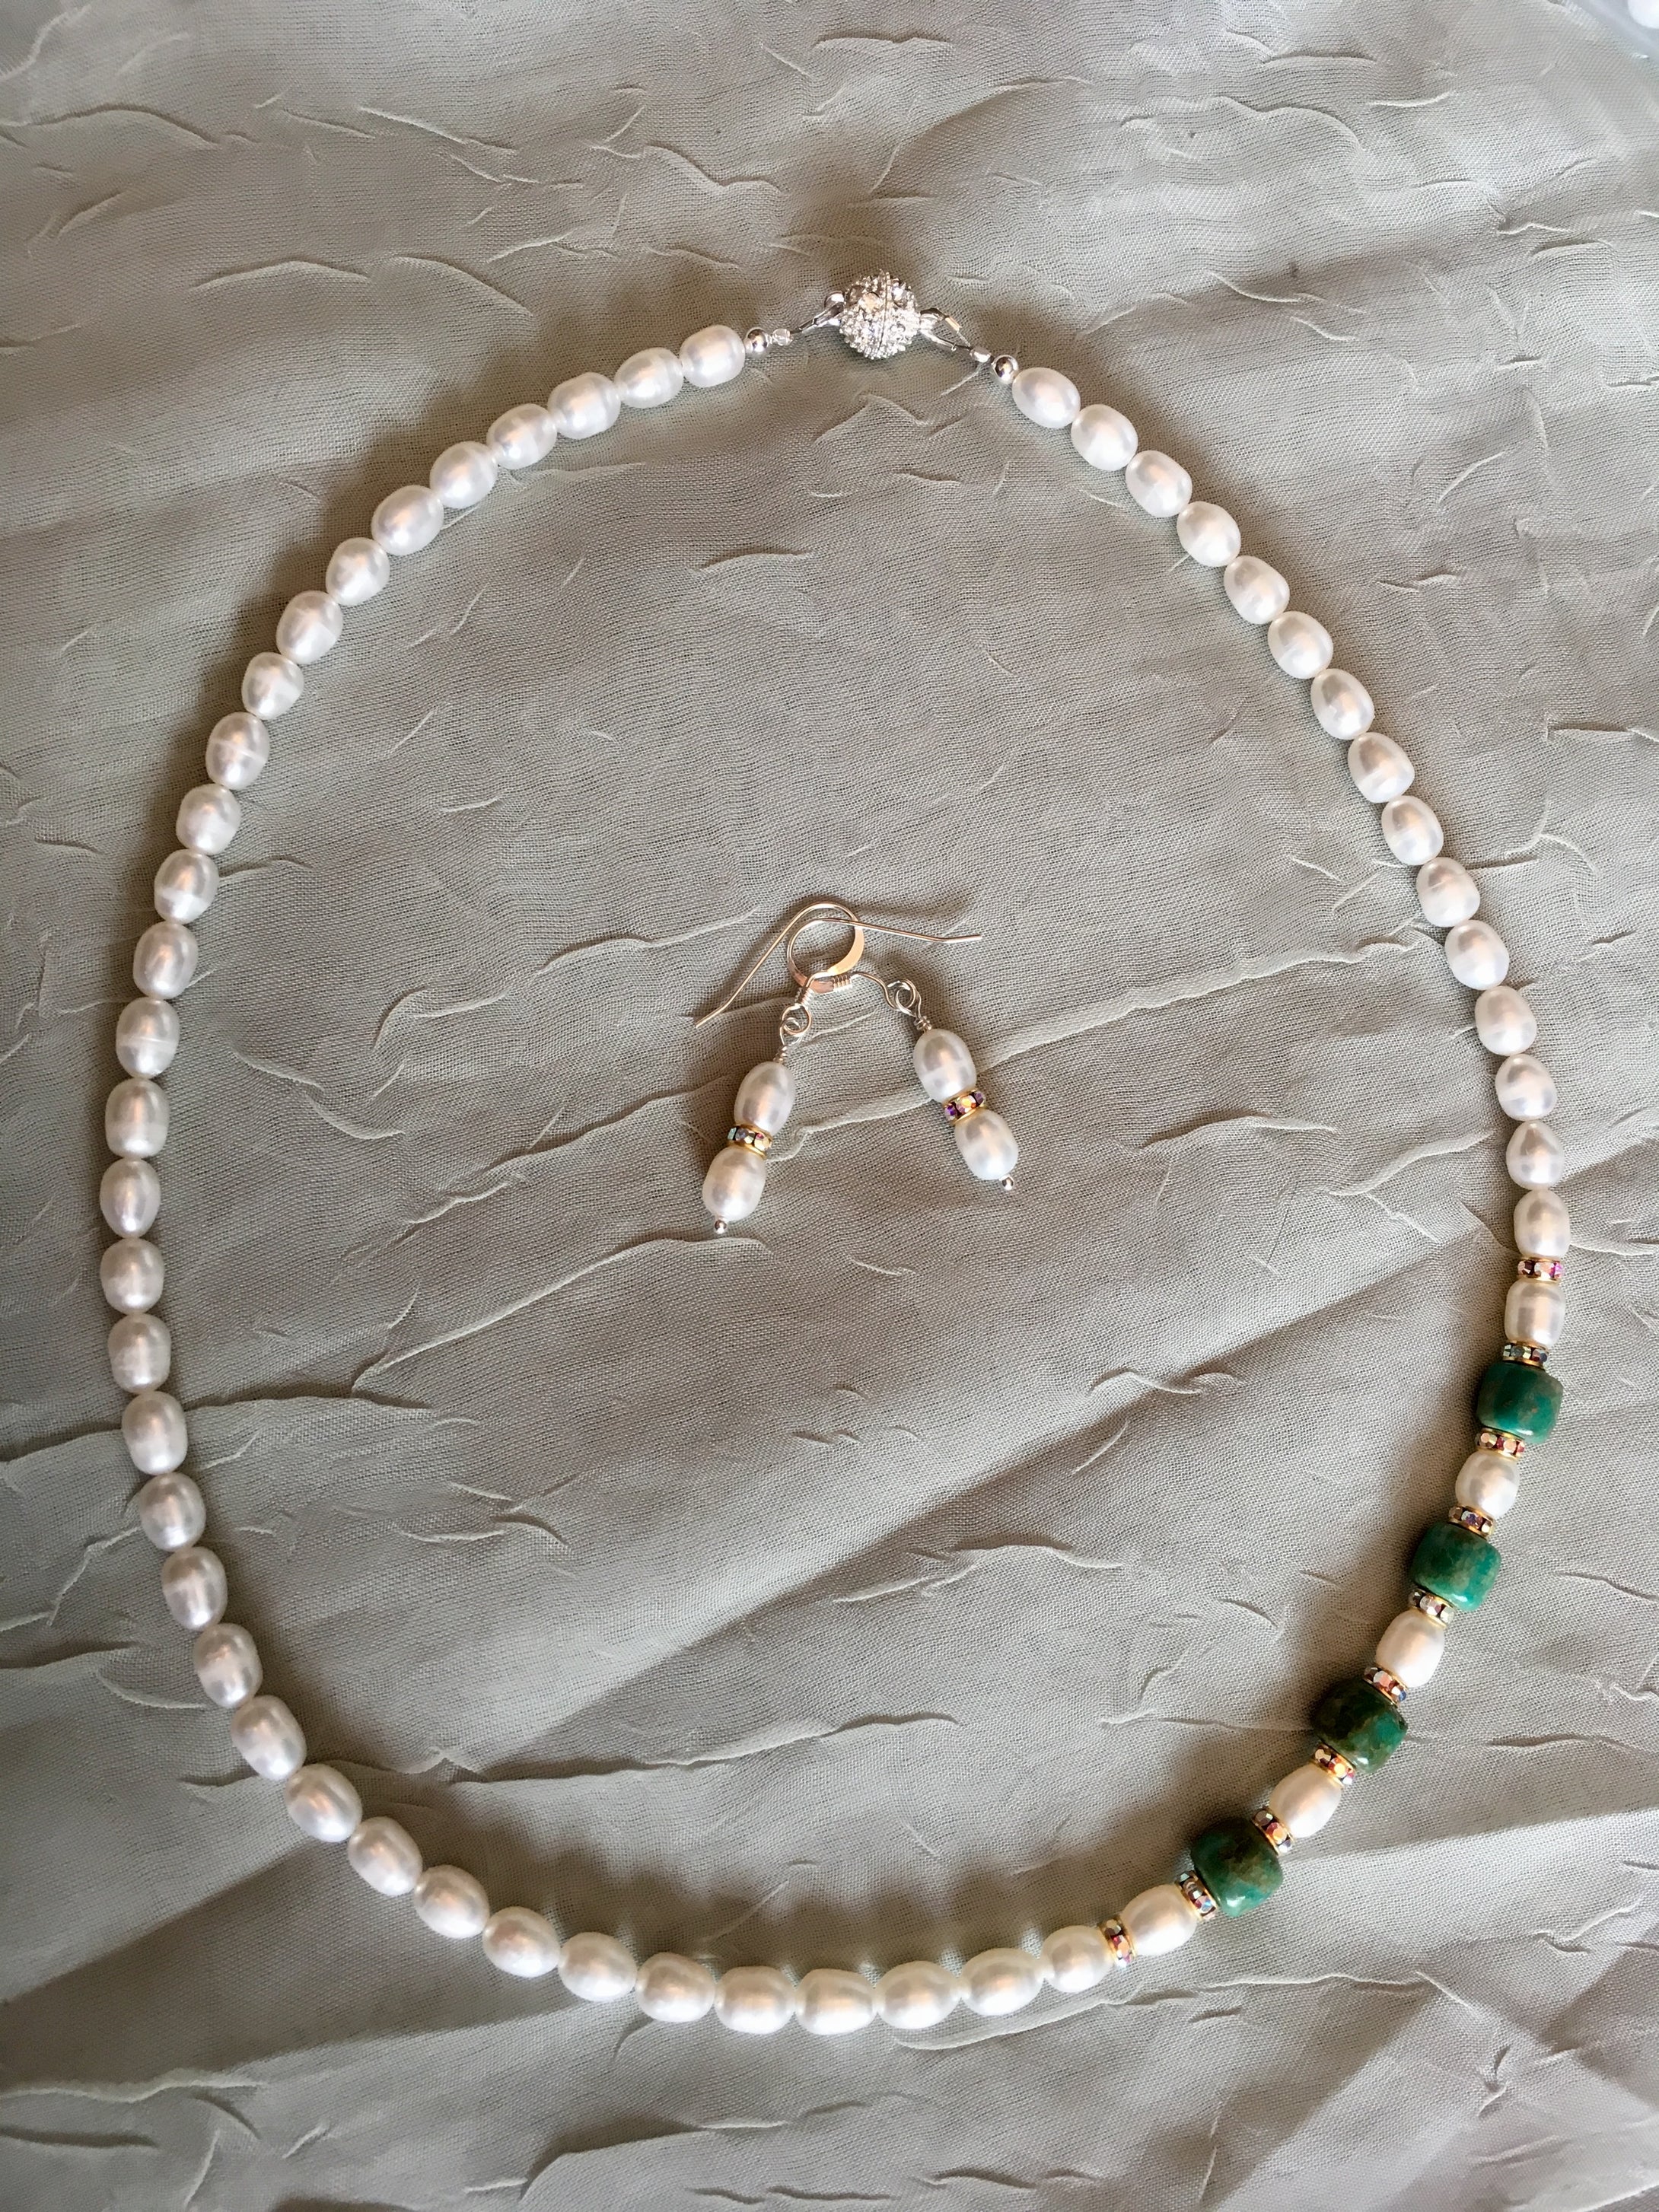 Freshwater Pearls, Turquoise, Swarovski Crystals and Sterling Silver.  17 1/2